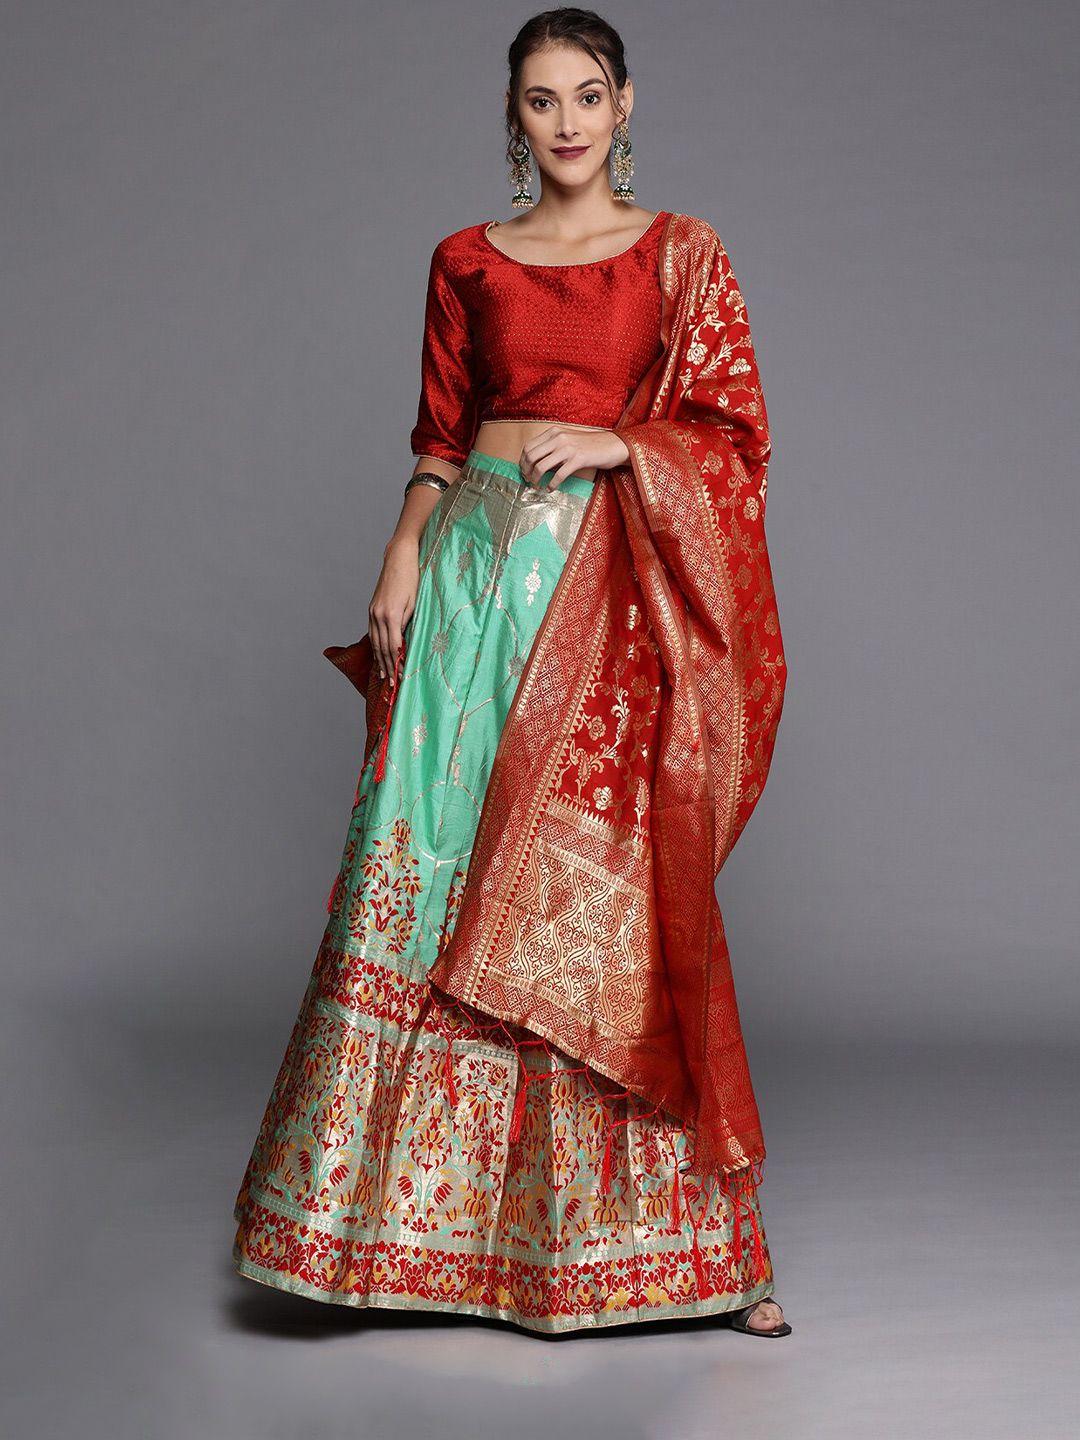 shadow & saining red & green semi-stitched lehenga unstitched blouse with dupatta